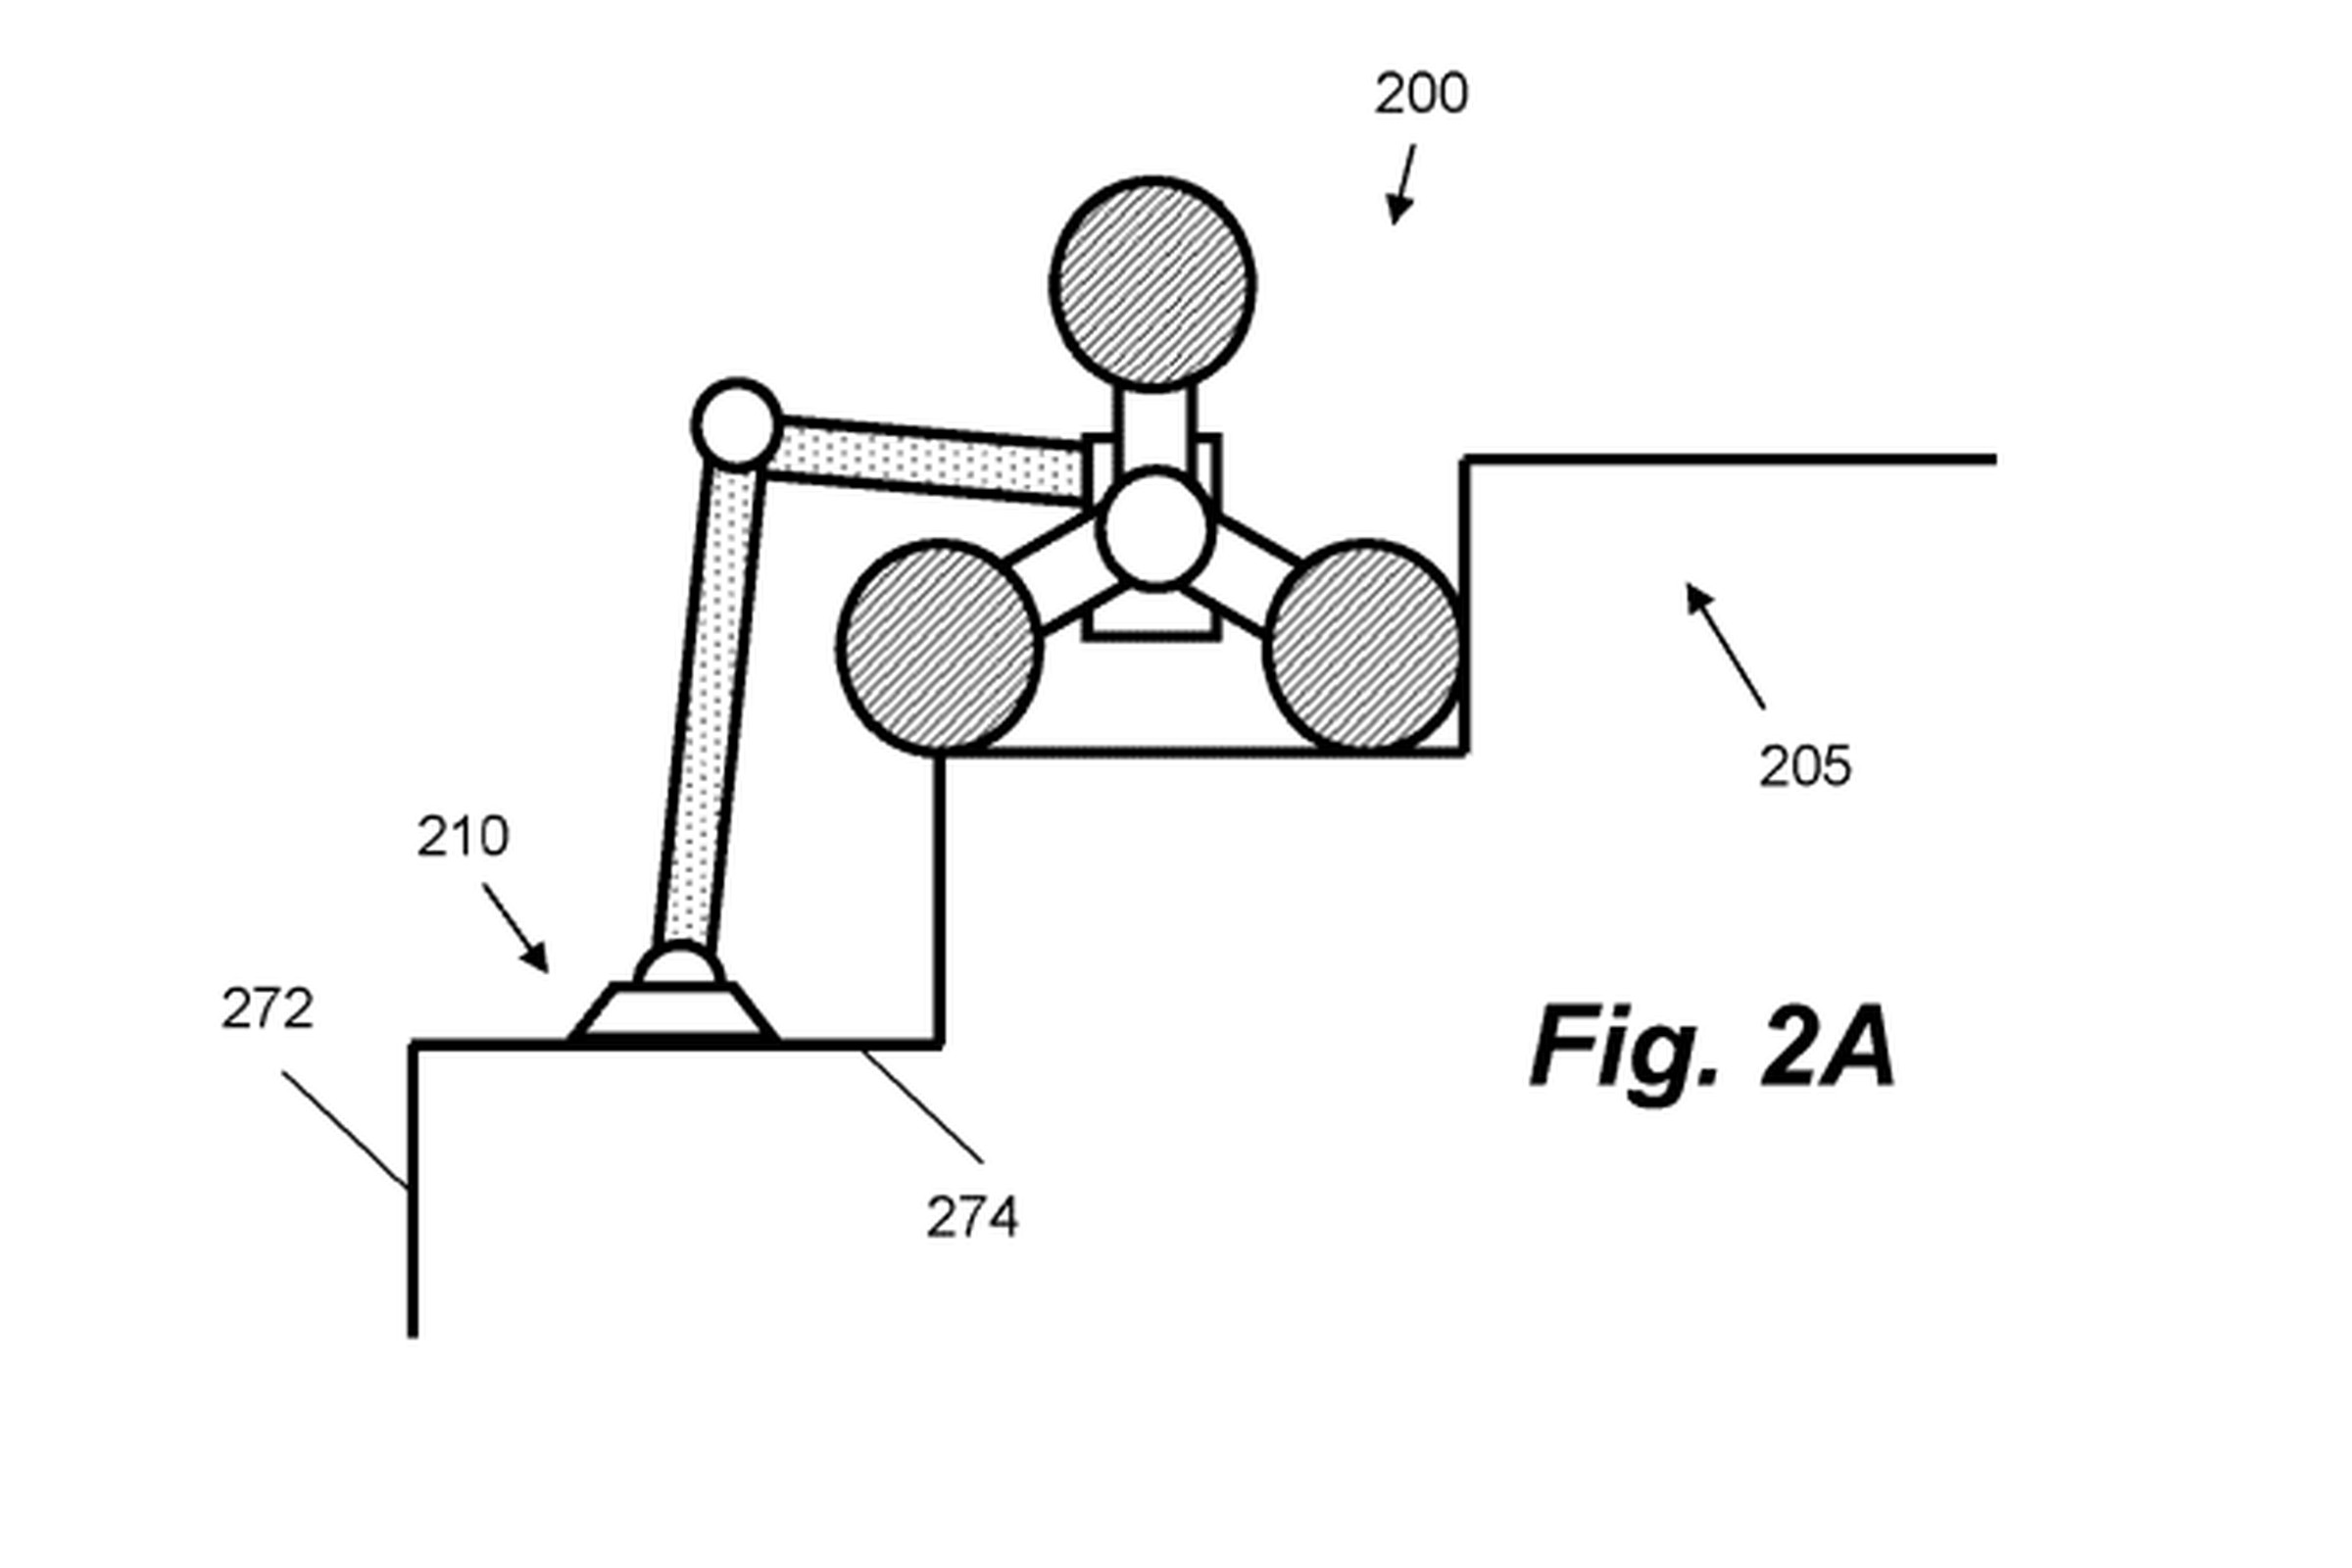 A patent filing from Dyson showing a robot that can climb and clean stairs